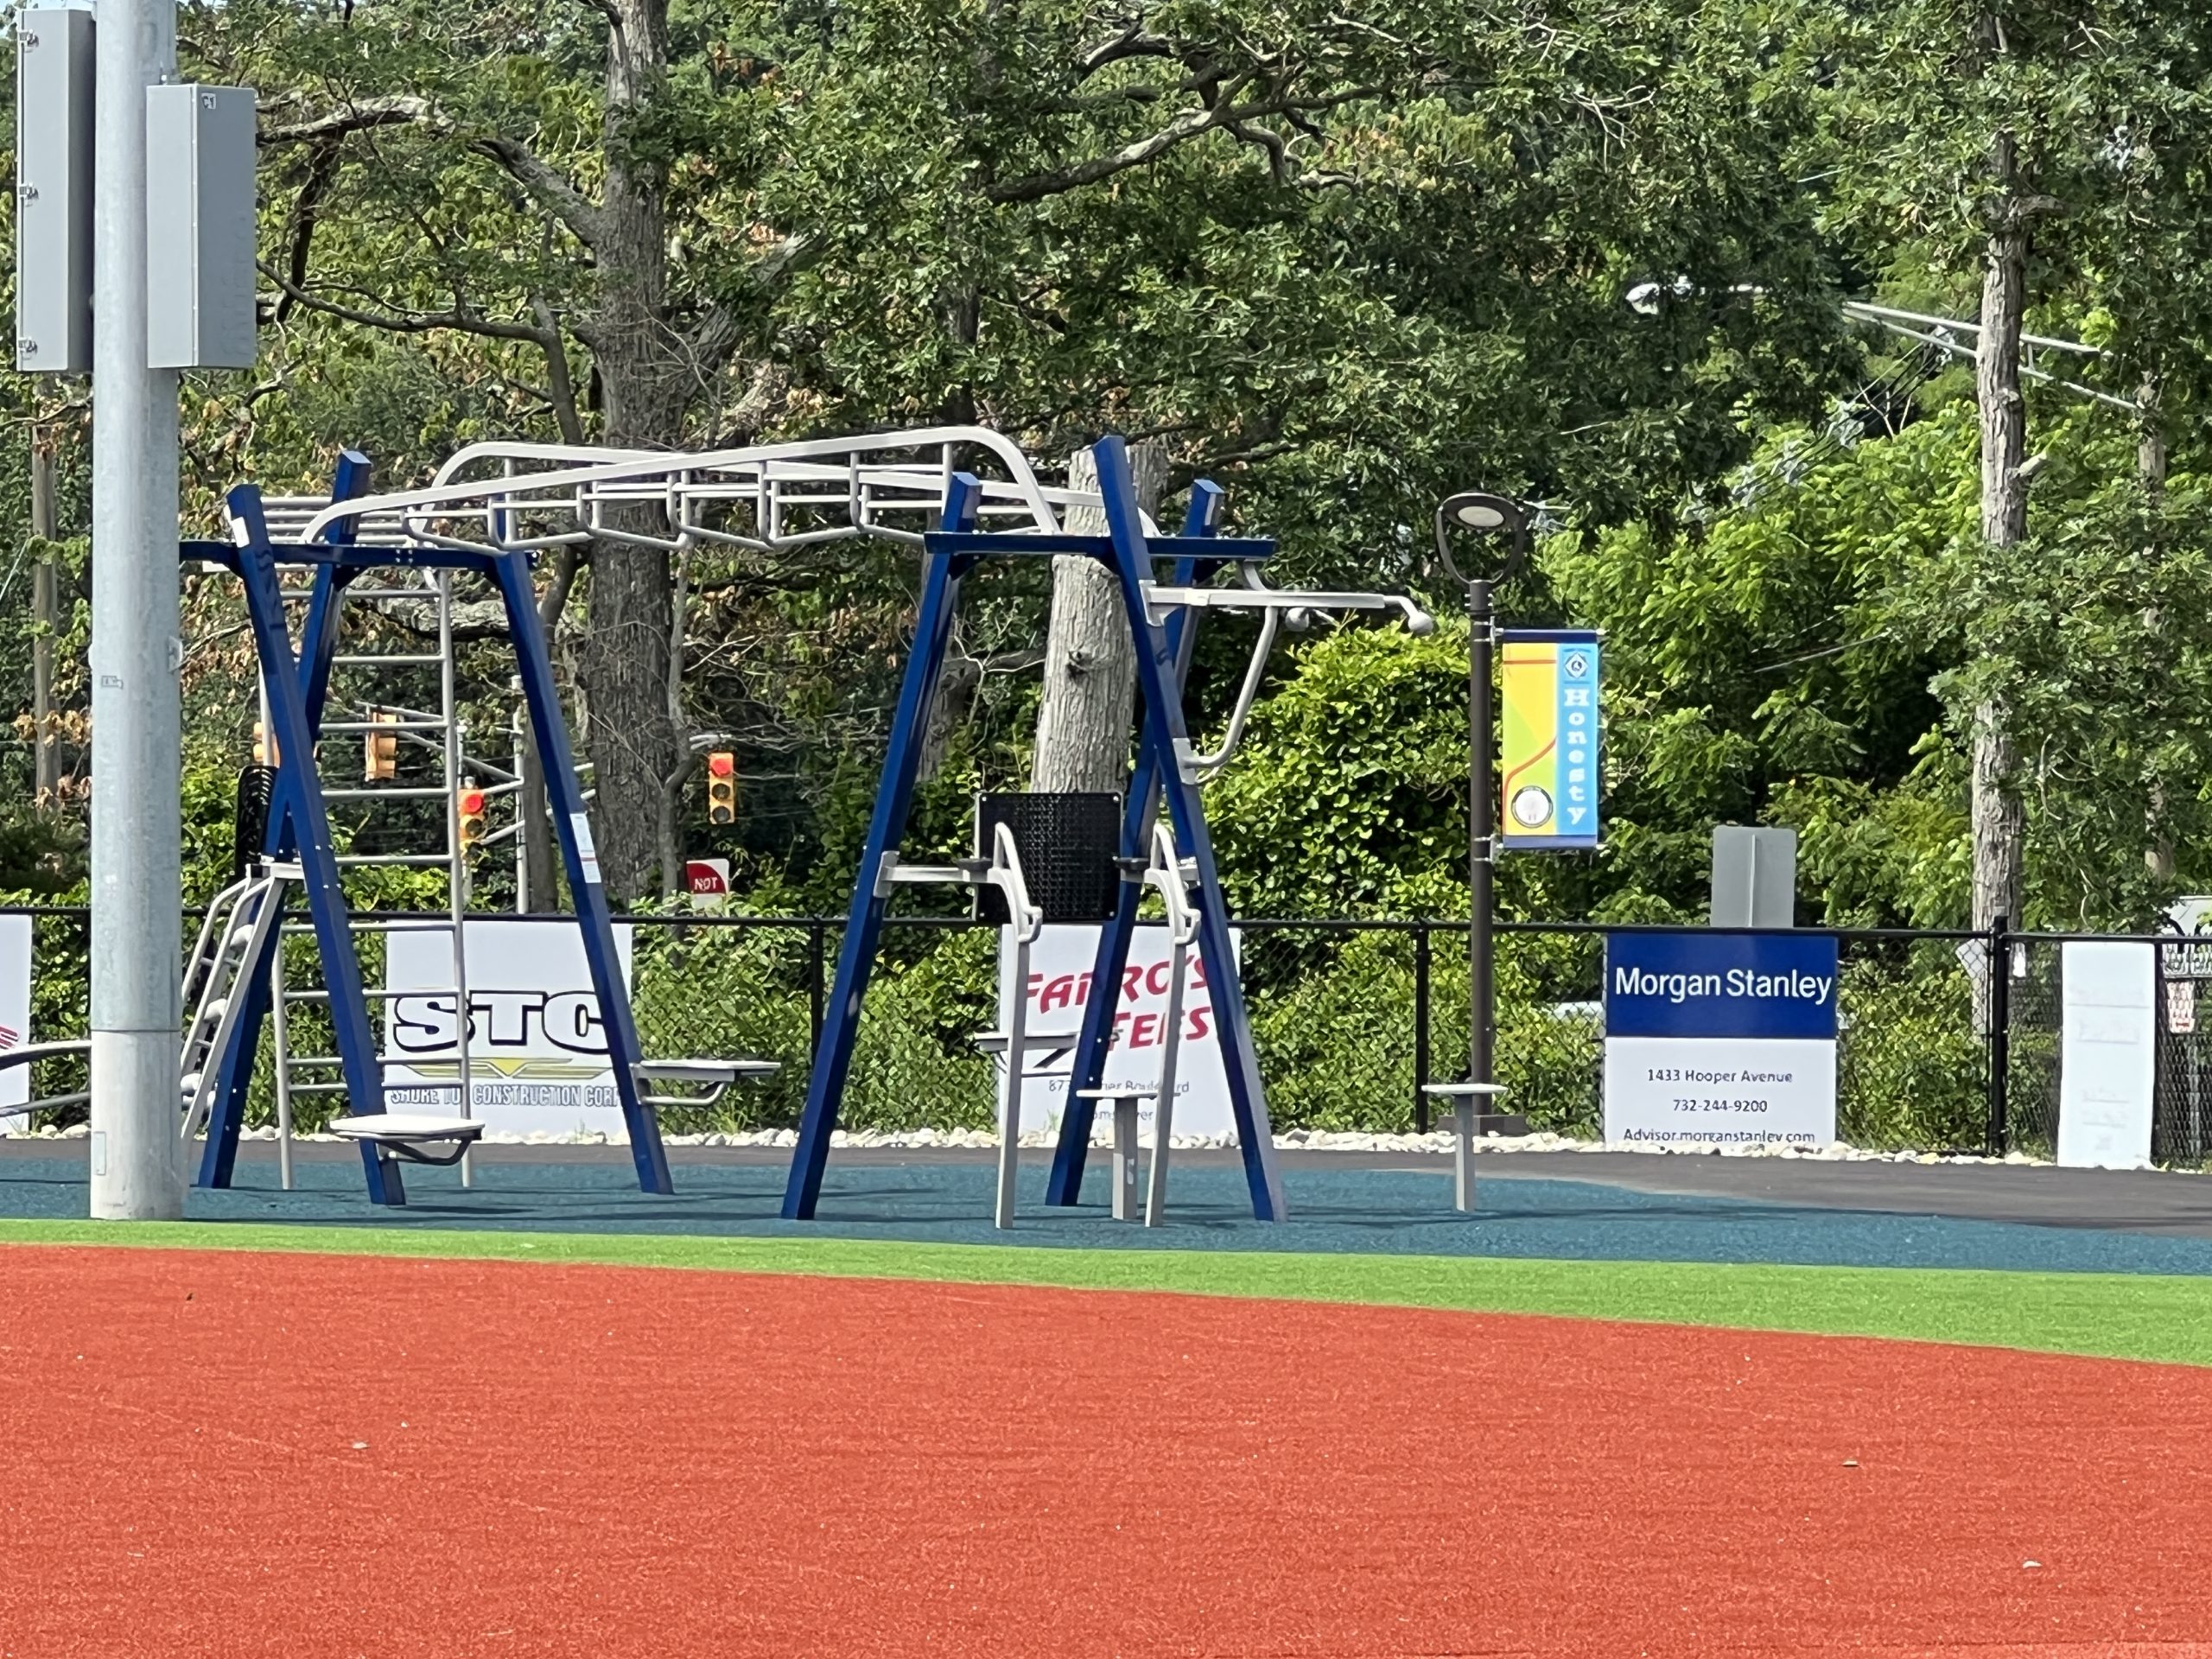 Field of Dreams Playground in Toms River NJ therapy equipment 2